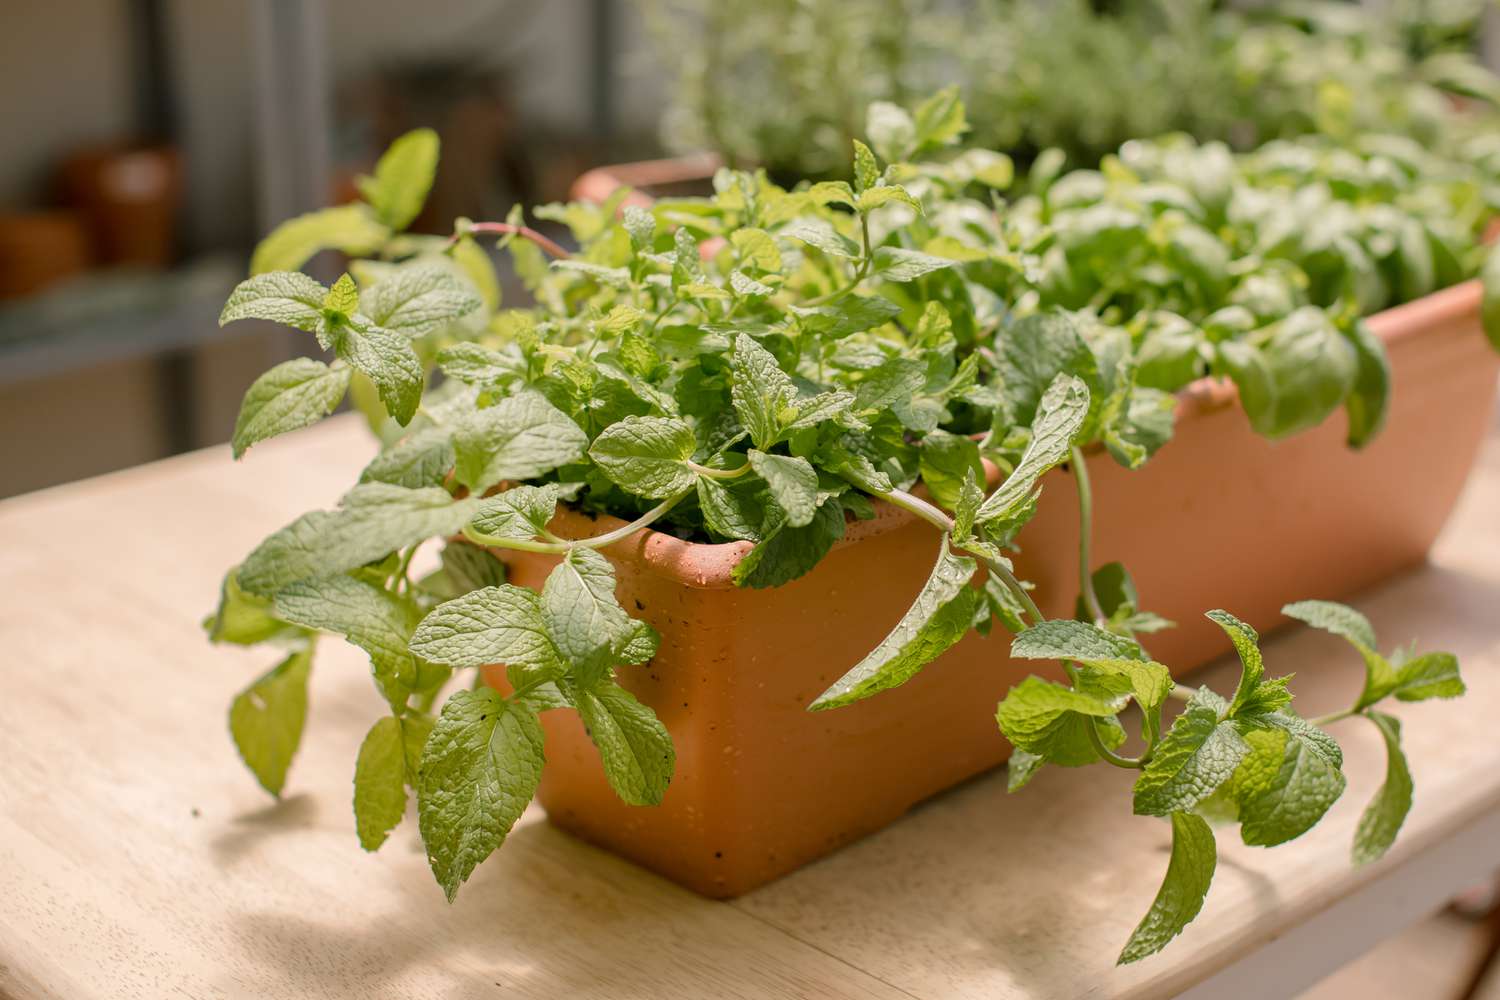 mint growing in a planter